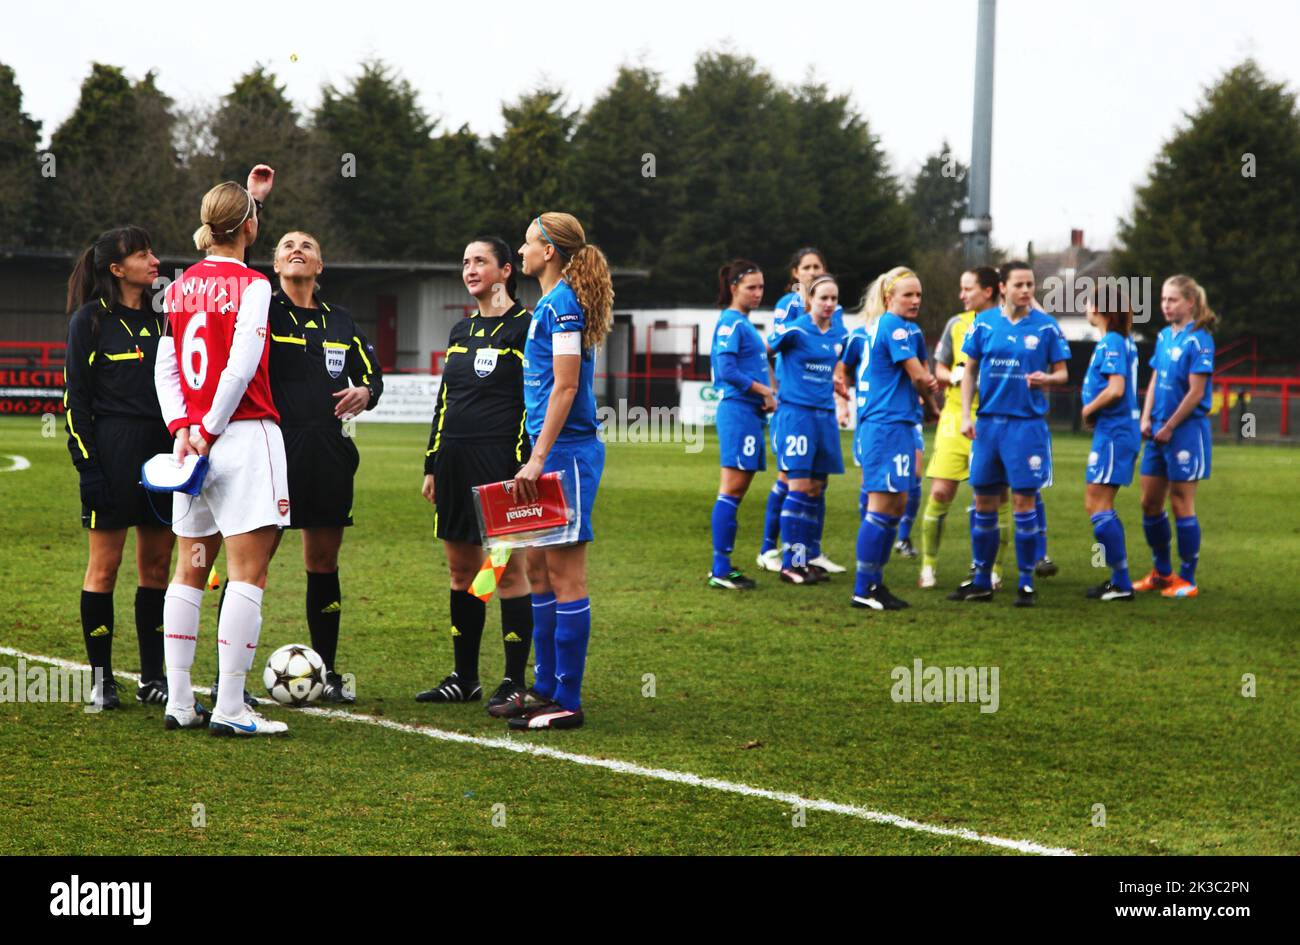 Champions League quarterfinals, Arsenal vs. Linköping football club. Linköping FC took the lead in the Champions League quarter-final against Arsenal at Meadow Park outside London, UK. In the picture: To the left, no. 6 Faye White and no. 7 Charlotte Rohlin, Linköpings FC. Stock Photo